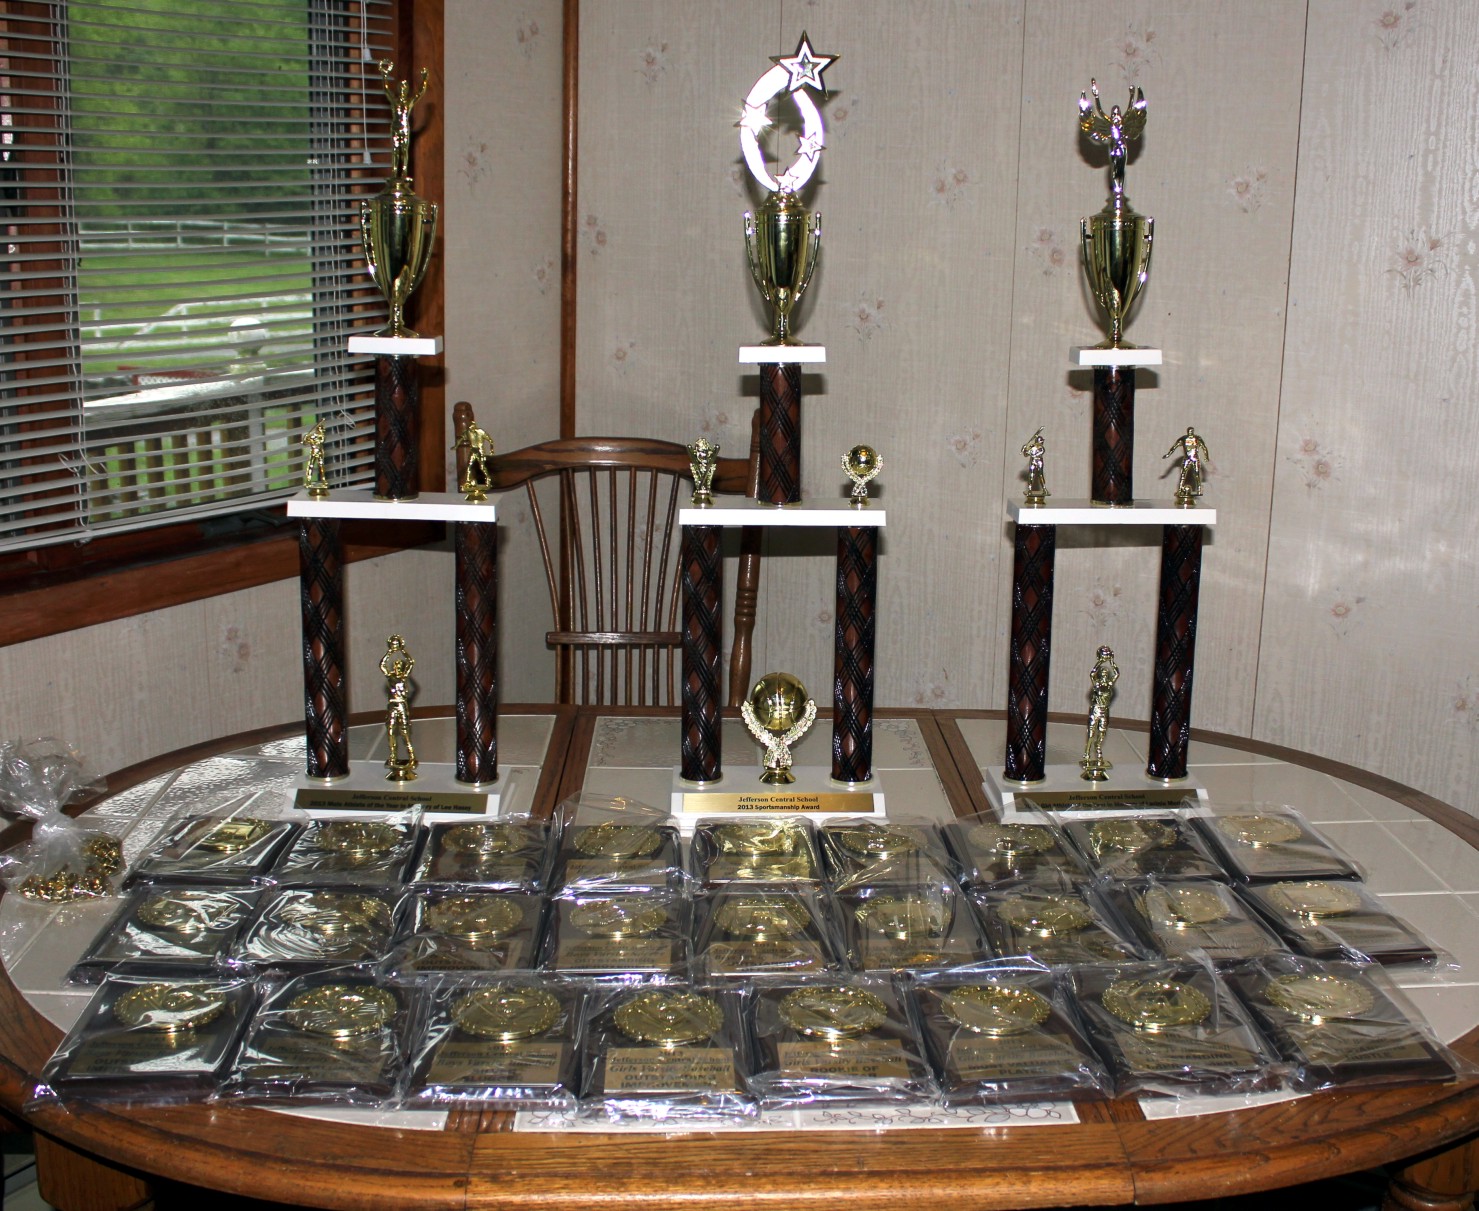 Plaques, Trophies, and Pins...Oh My! made with sublimation printing